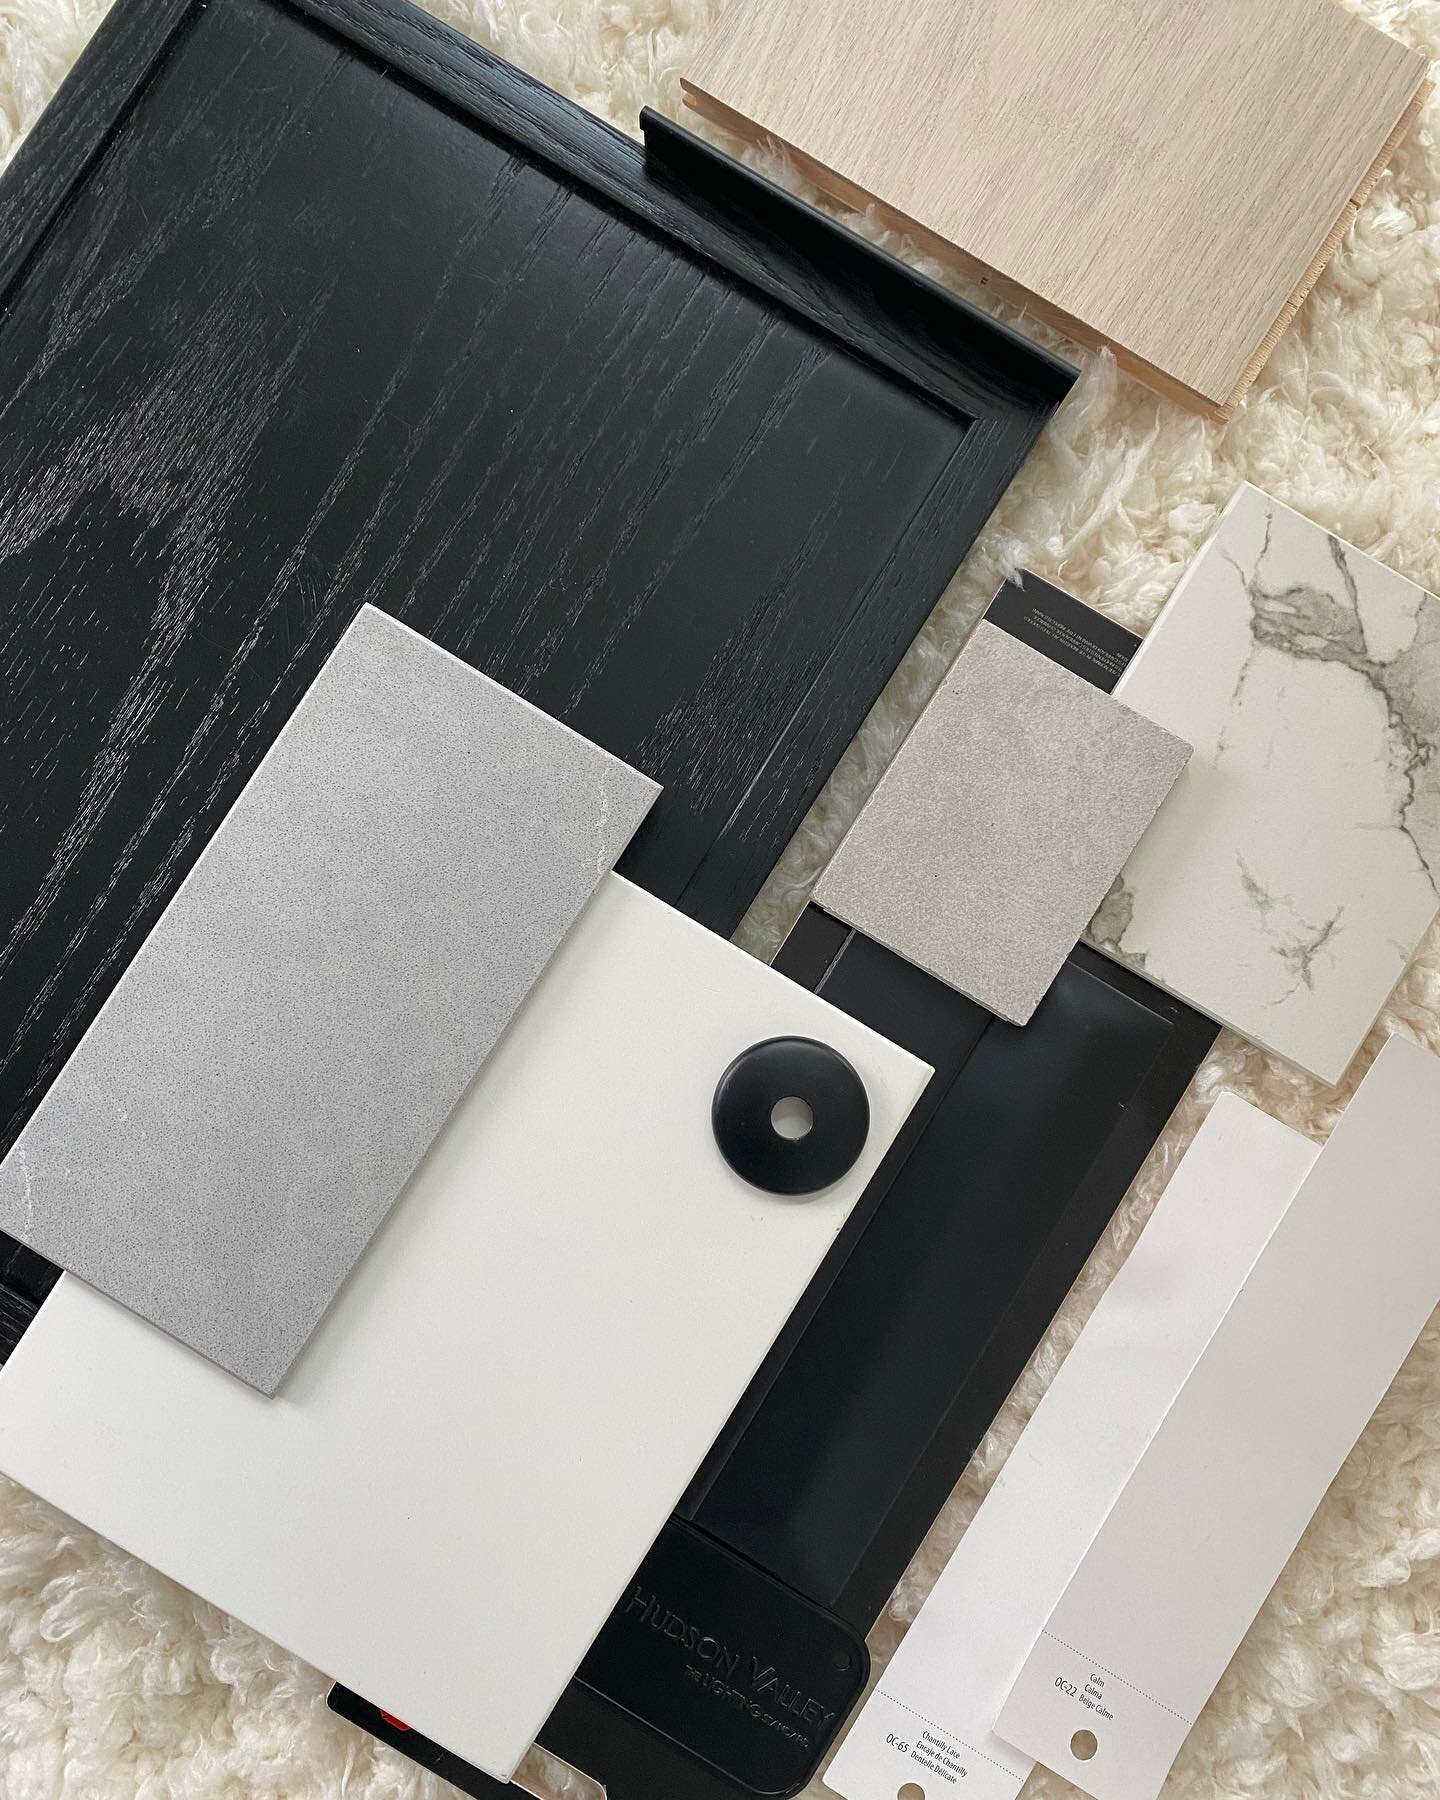 Finalized selections 🤍
-
#ProjectRobinHill
-
.
.
.
#mainfloorrenovation #homerenovation #interiors #homedesign #home #blackaccents #blackstainedoak #modern